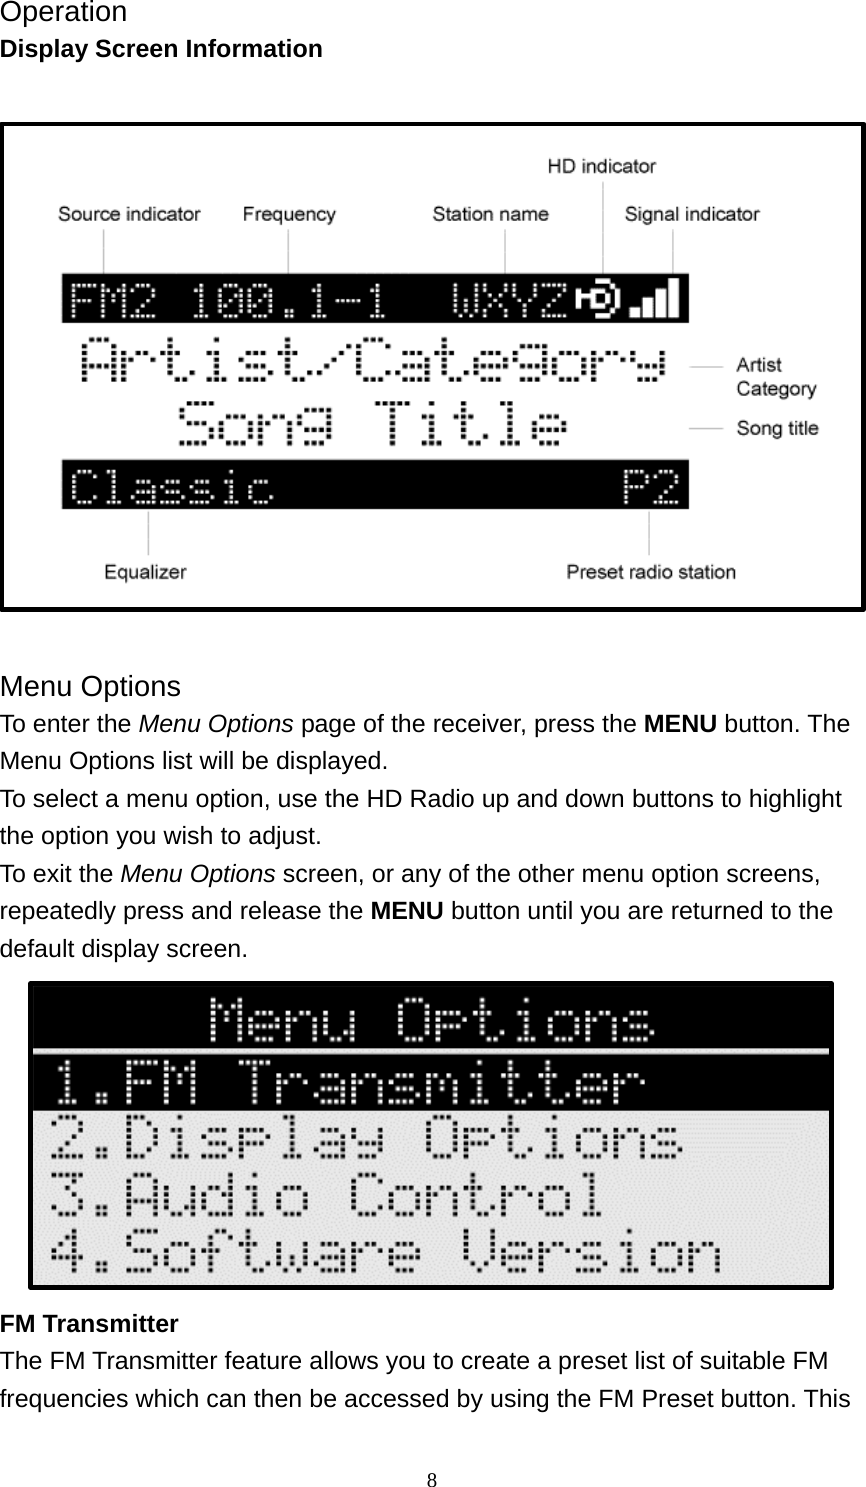  8Operation Display Screen Information   Menu Options To enter the Menu Options page of the receiver, press the MENU button. The Menu Options list will be displayed. To select a menu option, use the HD Radio up and down buttons to highlight the option you wish to adjust. To exit the Menu Options screen, or any of the other menu option screens, repeatedly press and release the MENU button until you are returned to the default display screen.  FM Transmitter The FM Transmitter feature allows you to create a preset list of suitable FM frequencies which can then be accessed by using the FM Preset button. This 